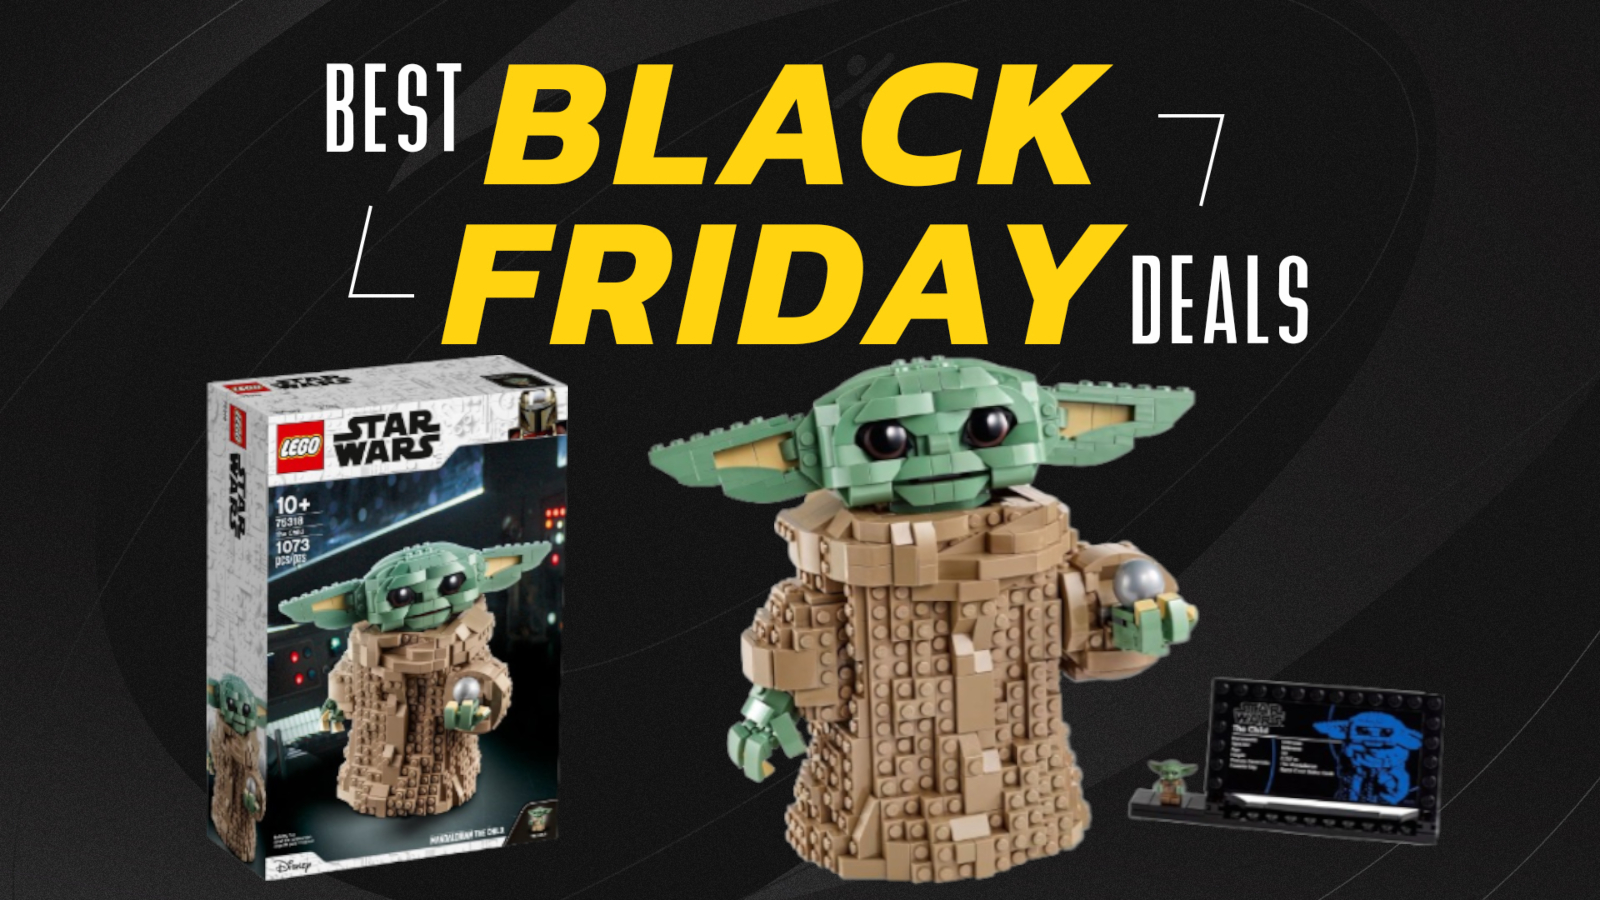 LEGO Star Wars Baby Yoda hits lowest-ever price for Black Friday